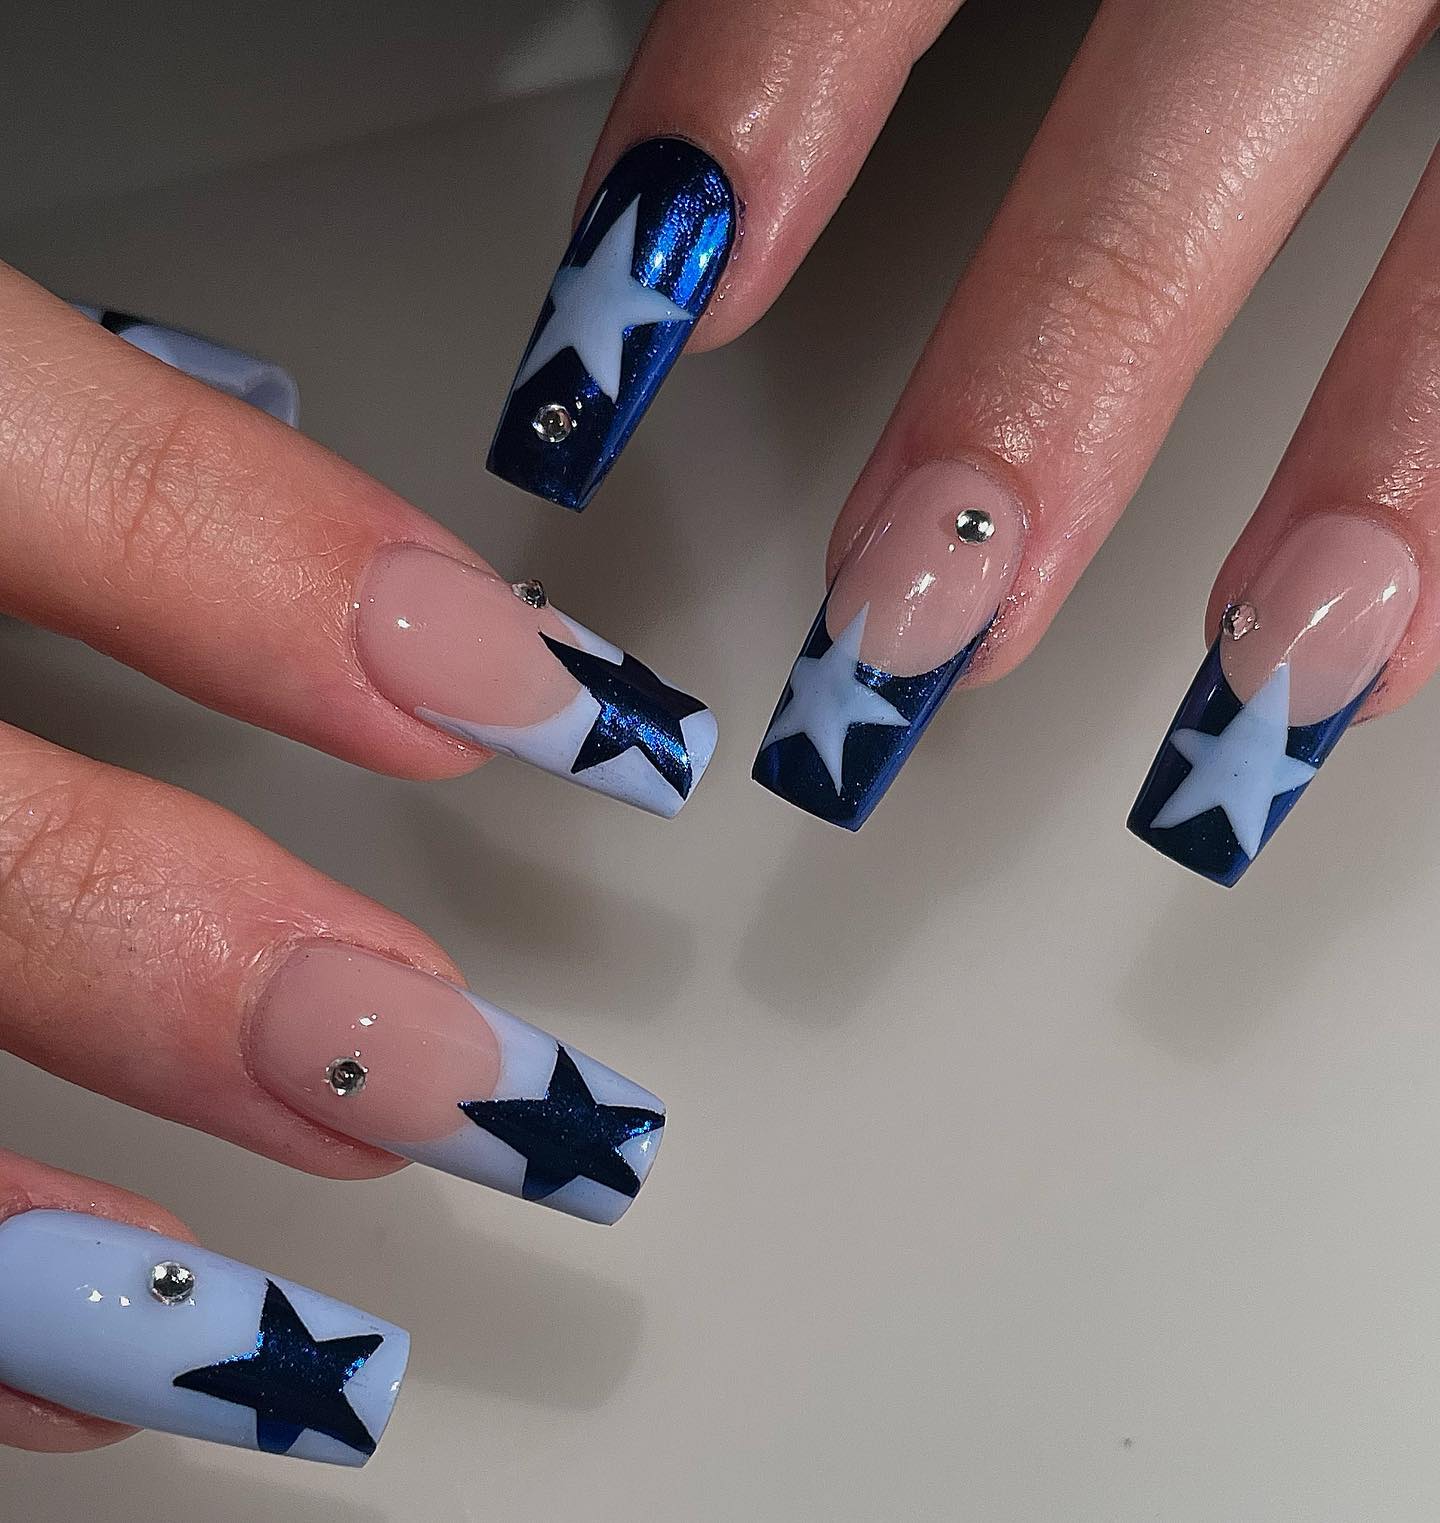 38 Blue Nail Designs To Try - Beauty Bay Edited